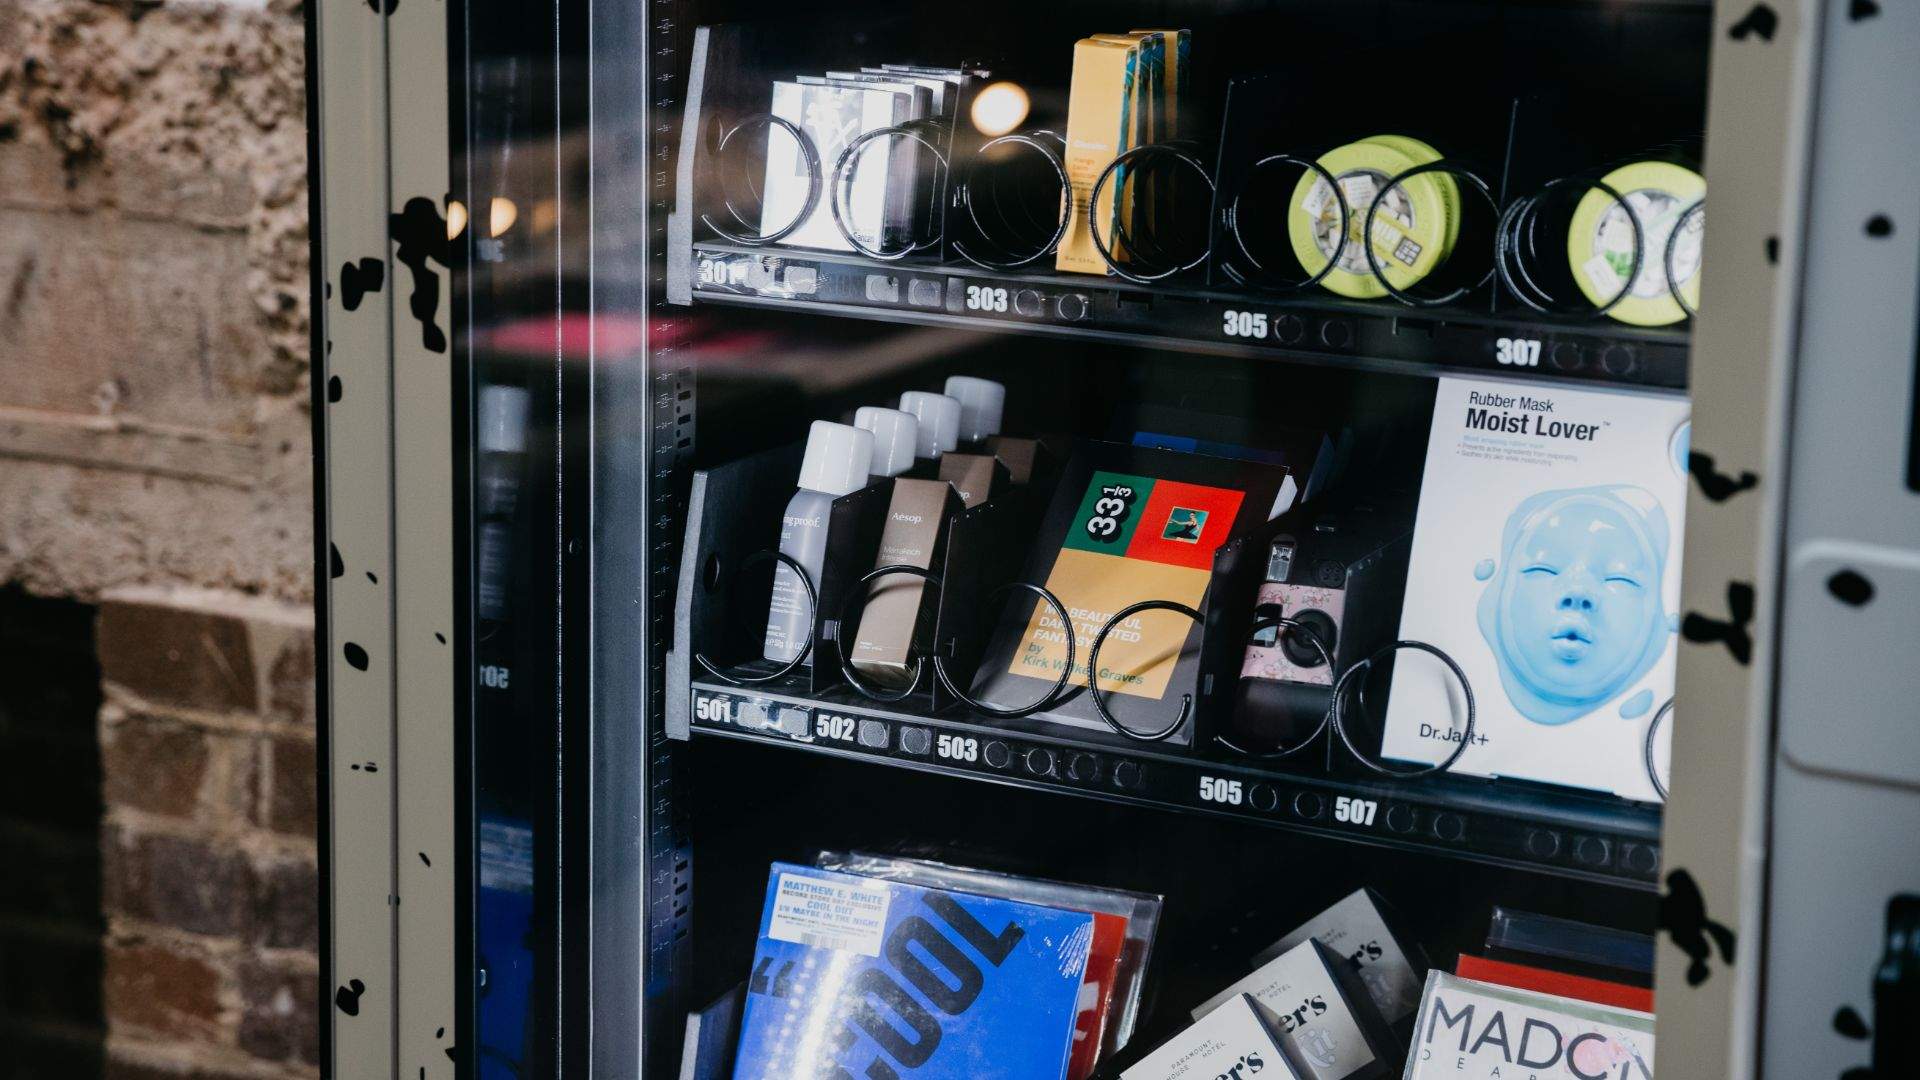 Paramount House Hotel's Vending Machine Stocks Supreme Socks, Glossier Makeup and Sex Toys